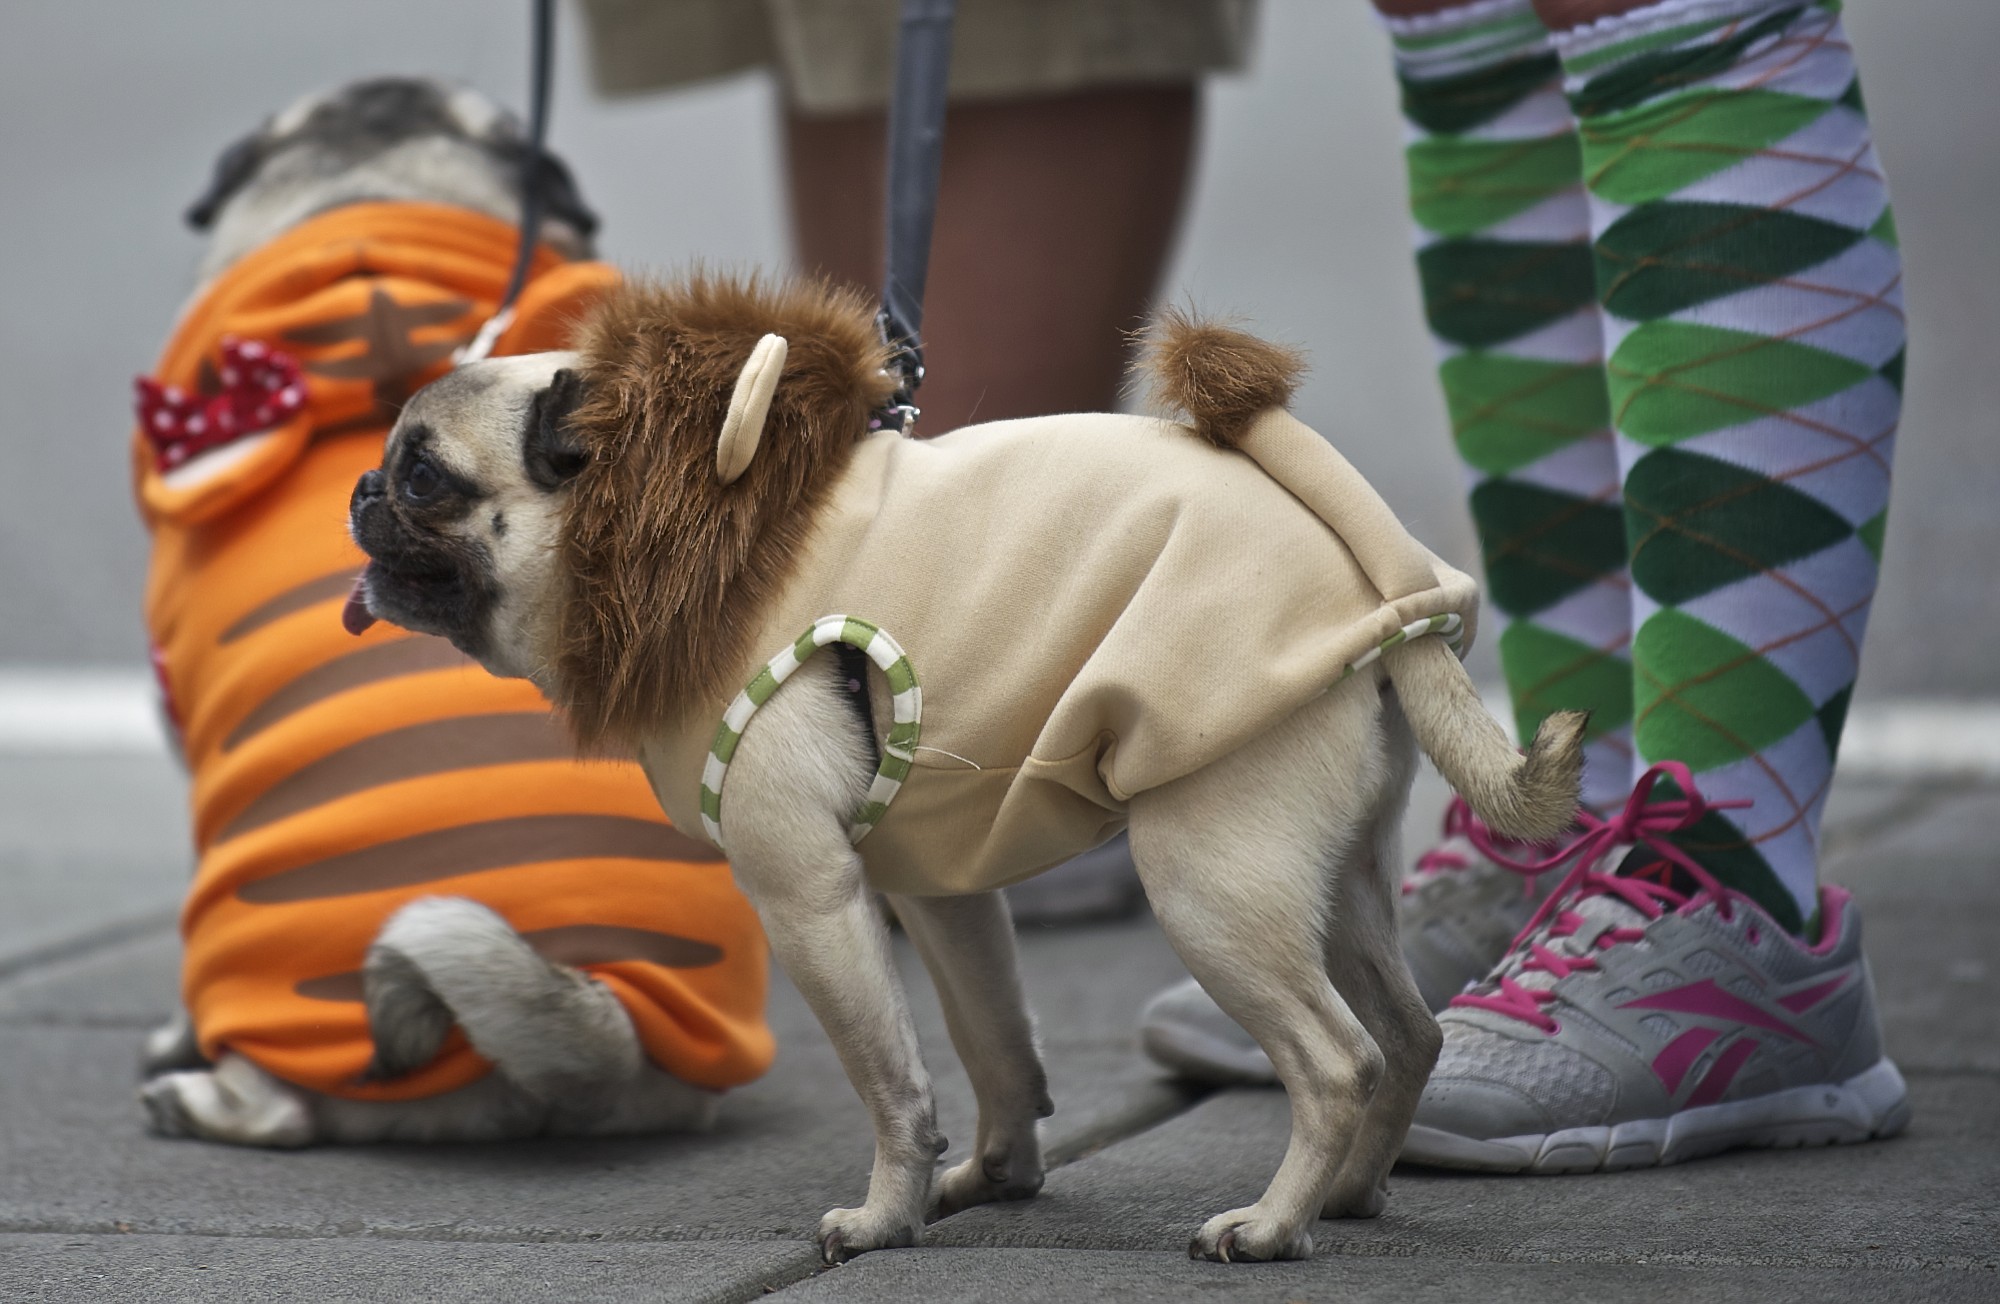 Hai Truong and Raven Morris stand with their two dogs Rodgie, foreground, who is dressed like a lion, and Babbles, who is dressed like a tiger, during the opening weekend of the Vancouver Farmers Market on Sunday March 16, 2014.